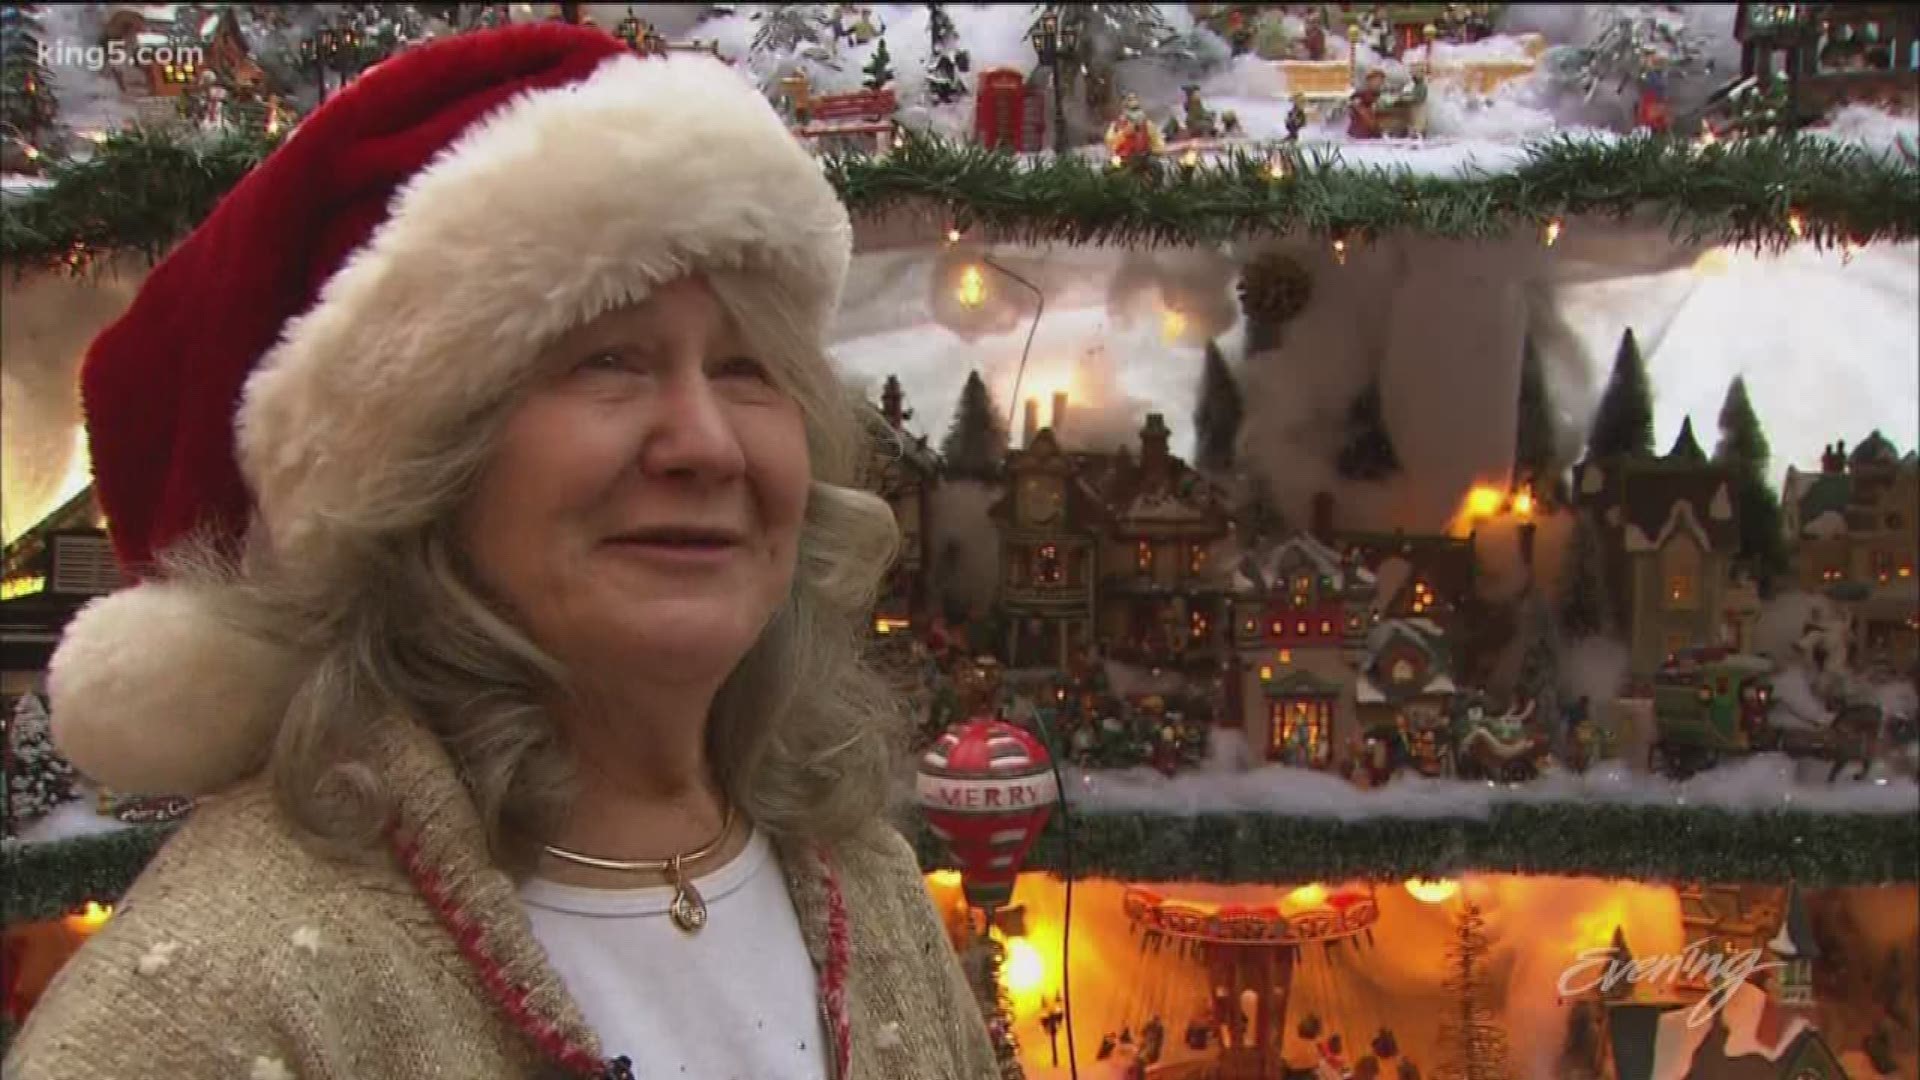 For the past 15 years, Port Orchard's Patty Wagner has created a mini holiday masterpiece.